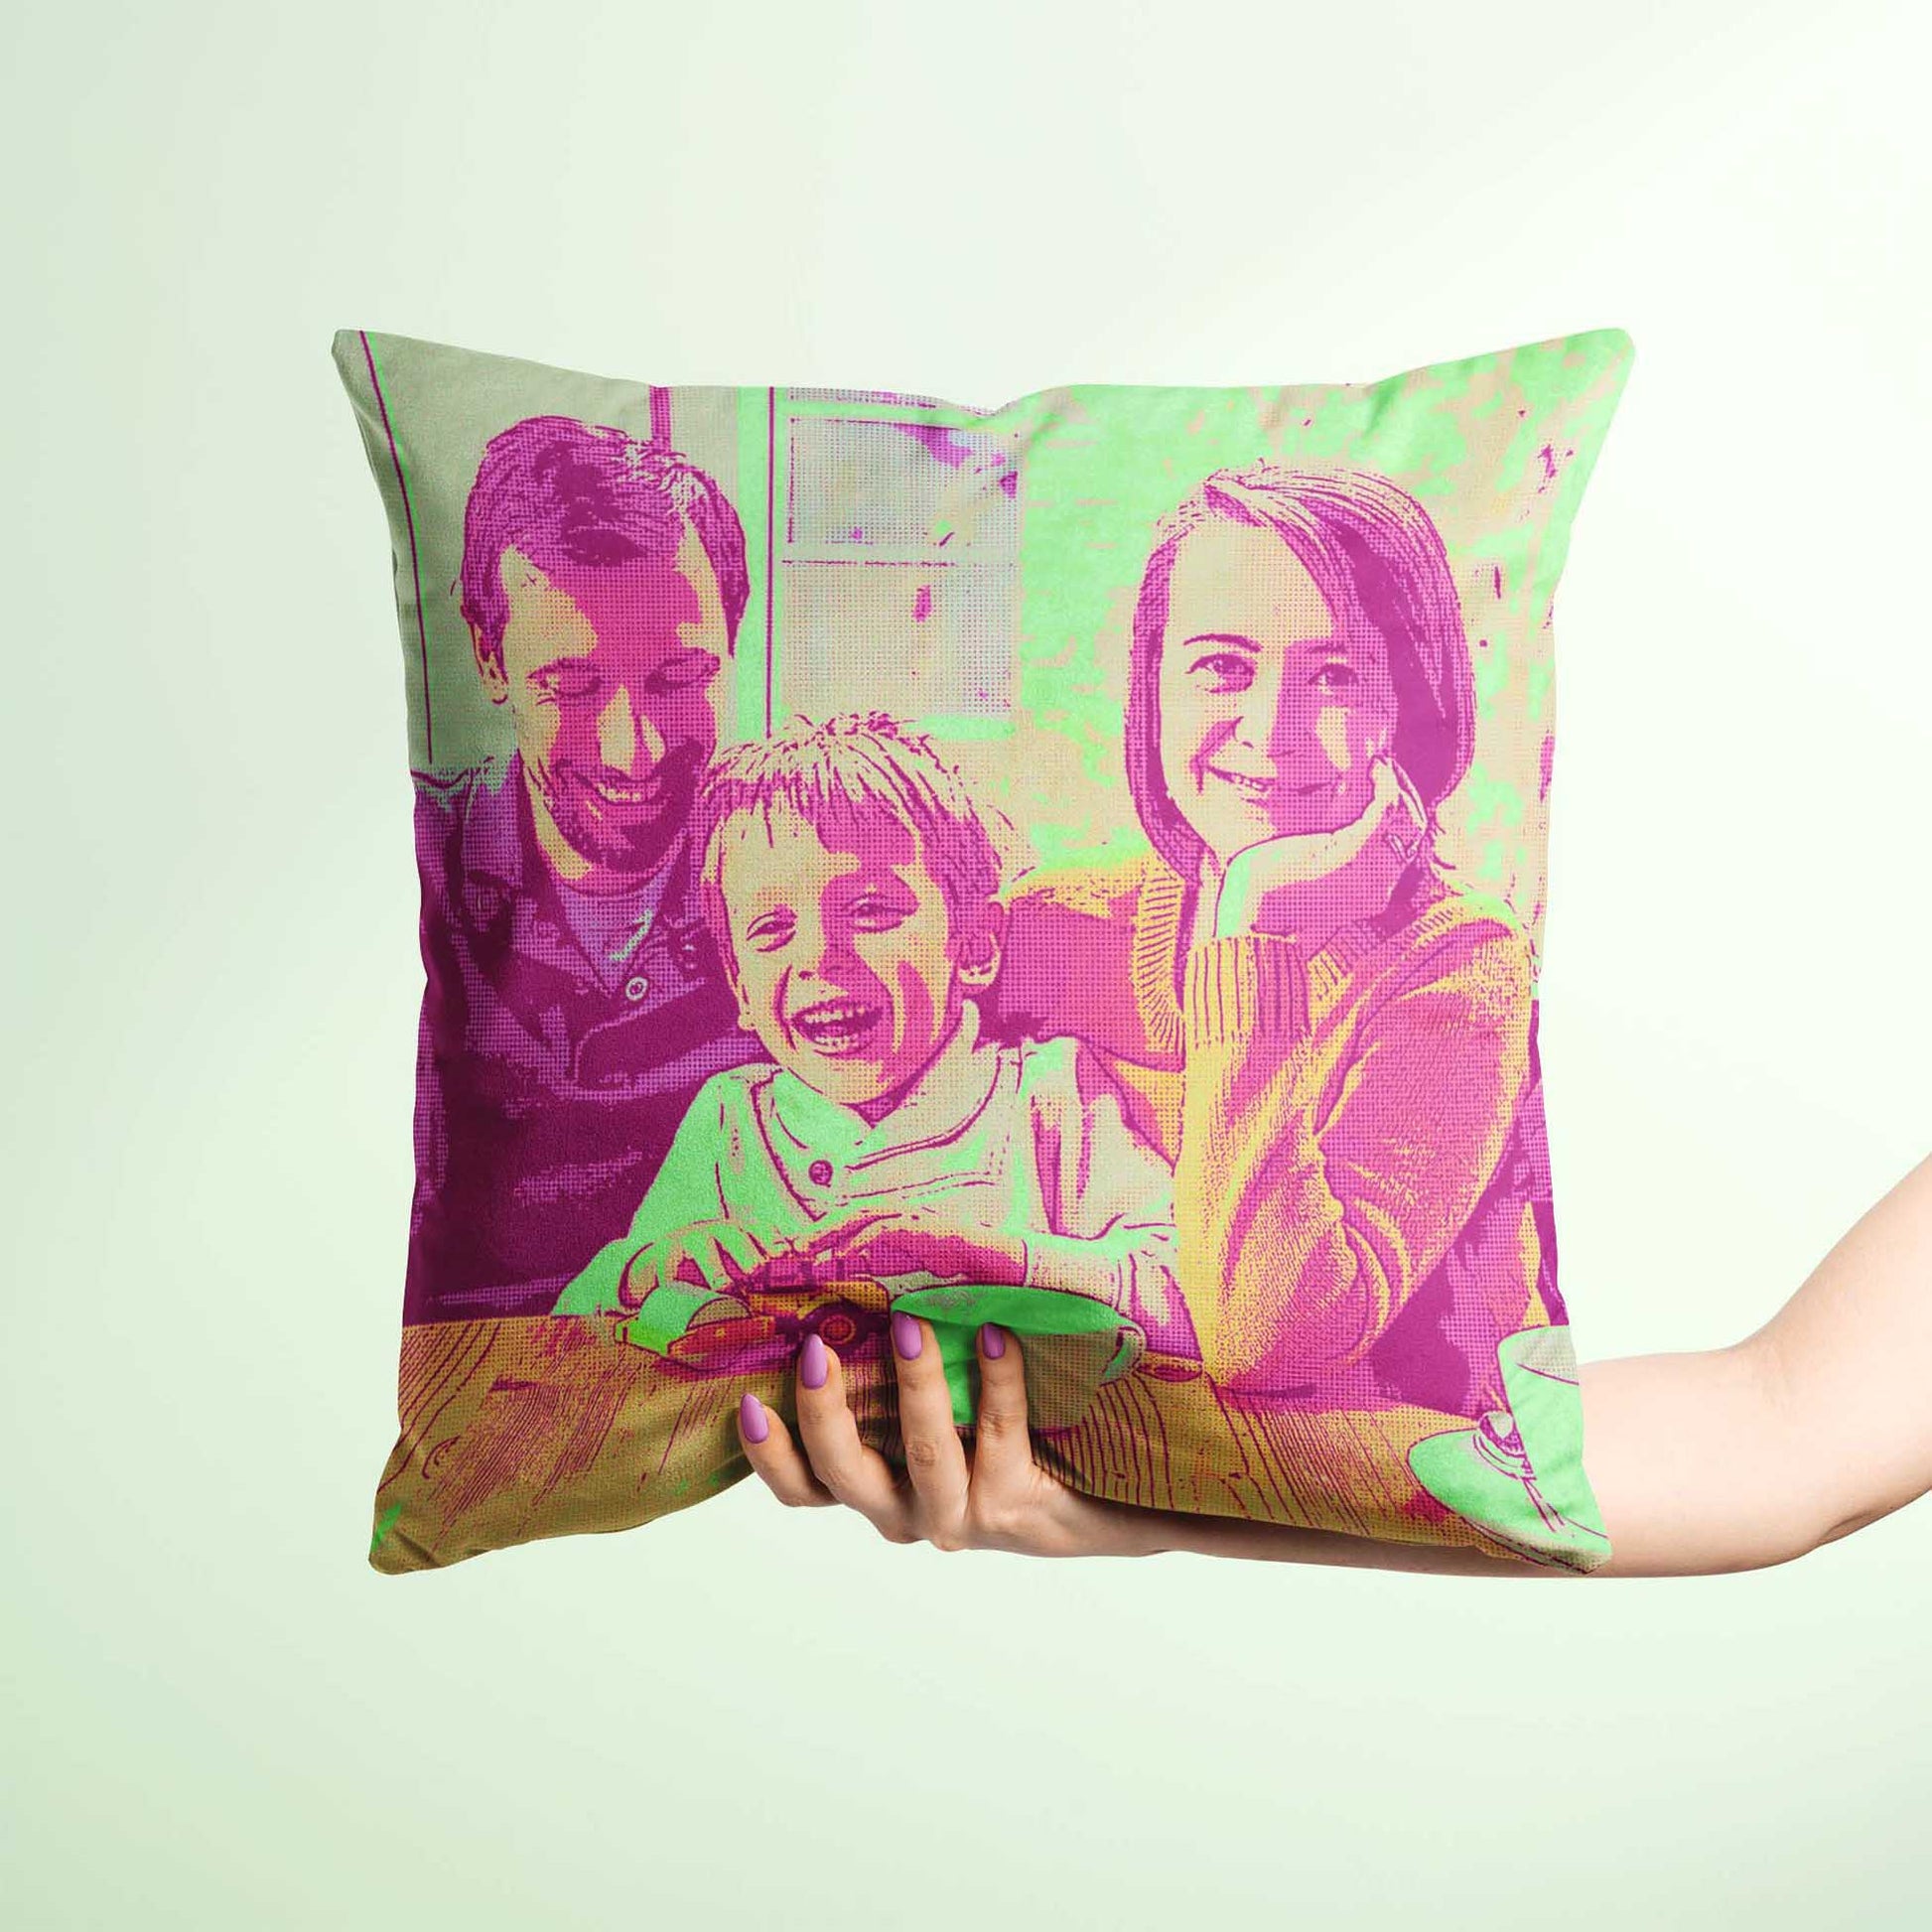 Add a touch of fun and vibrancy to your home with a personalised Pink & Green Pop Art Cushion. Made from soft velvet fabric, this colourful and full cushion offers a cosy and inviting feel. Print it from a photo and let your creativity shine